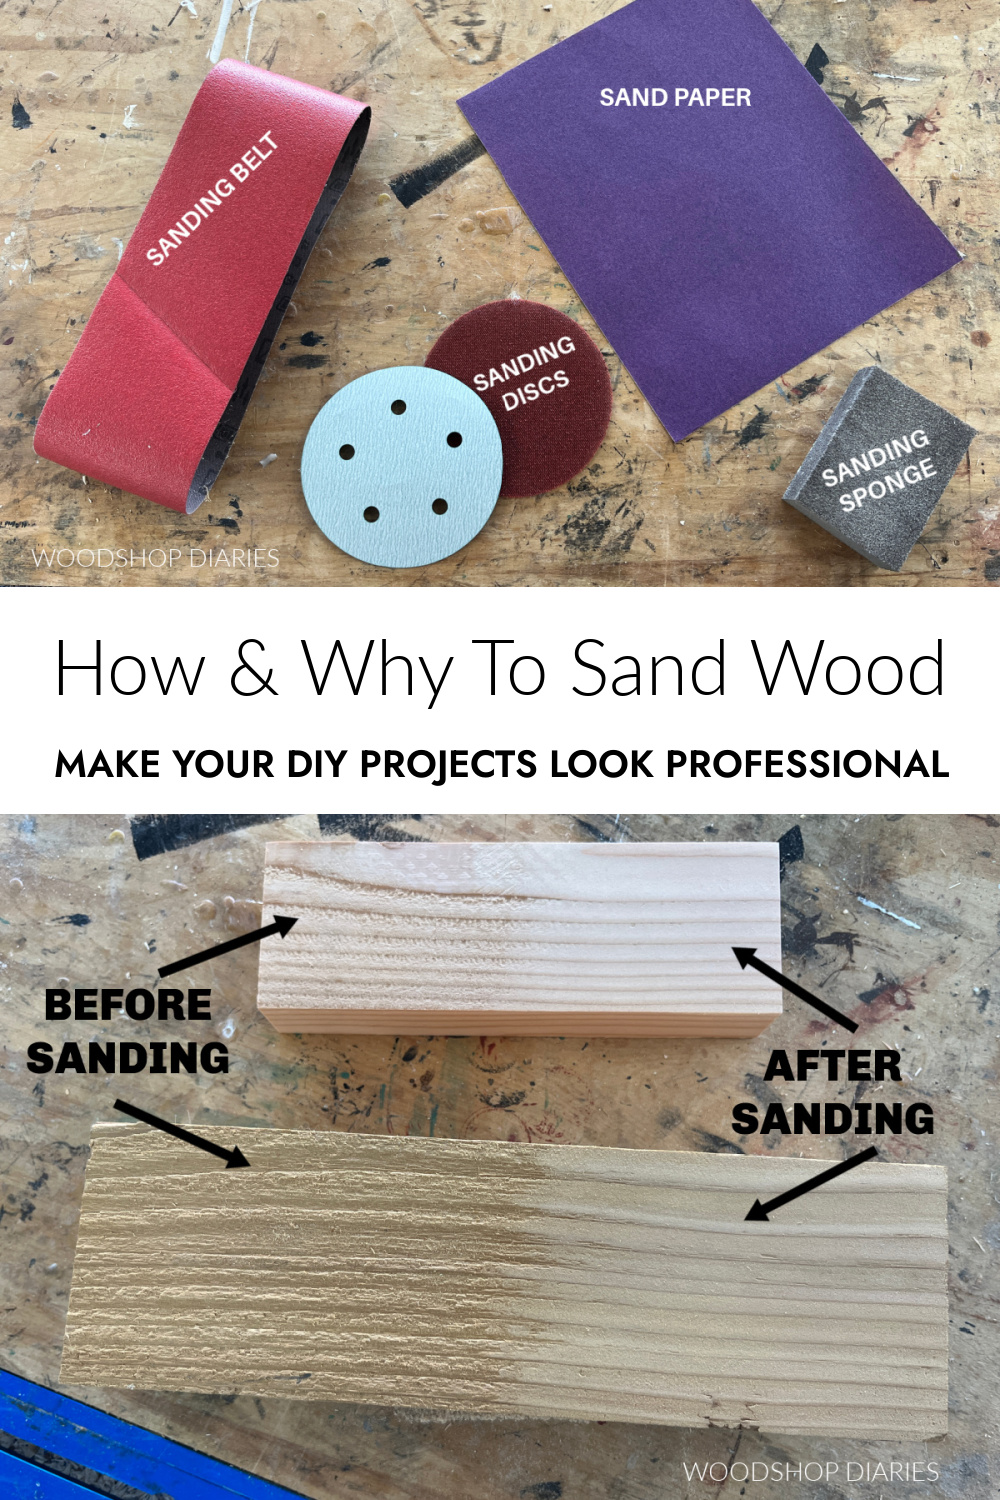 Pinterest collage image showing types of sandpaper at top and before and after sanding example image at bottom with text "how and why to sand wood make your DIY projects look professional"